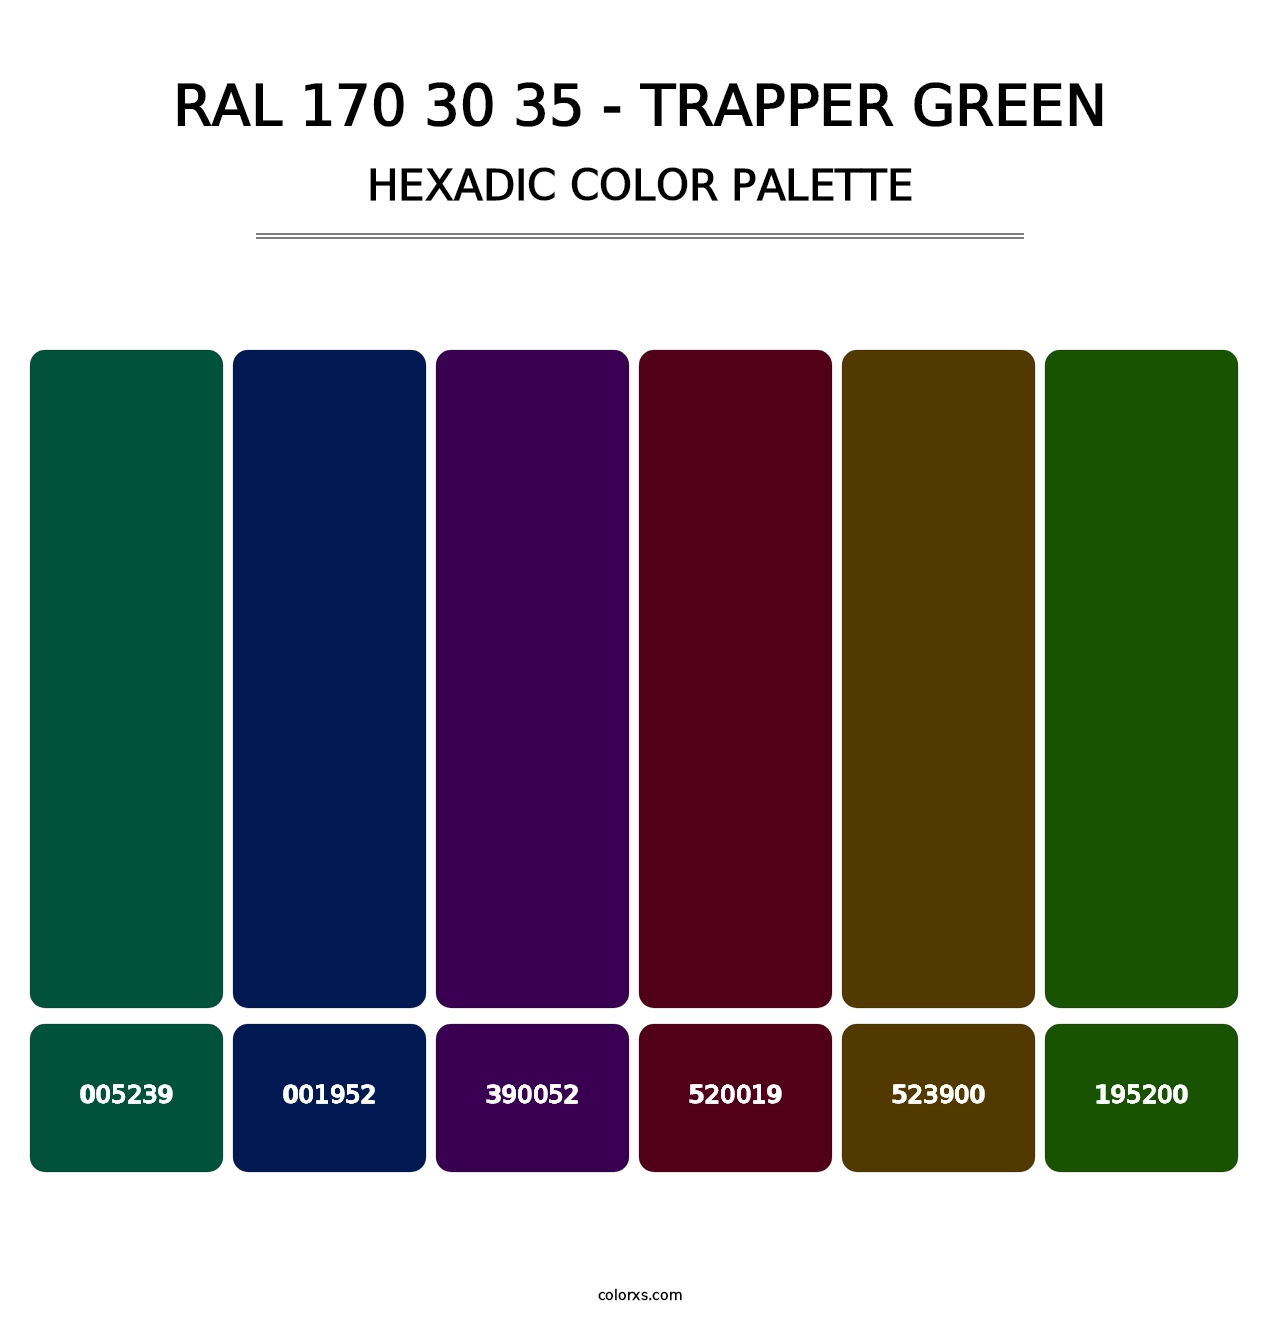 RAL 170 30 35 - Trapper Green - Hexadic Color Palette